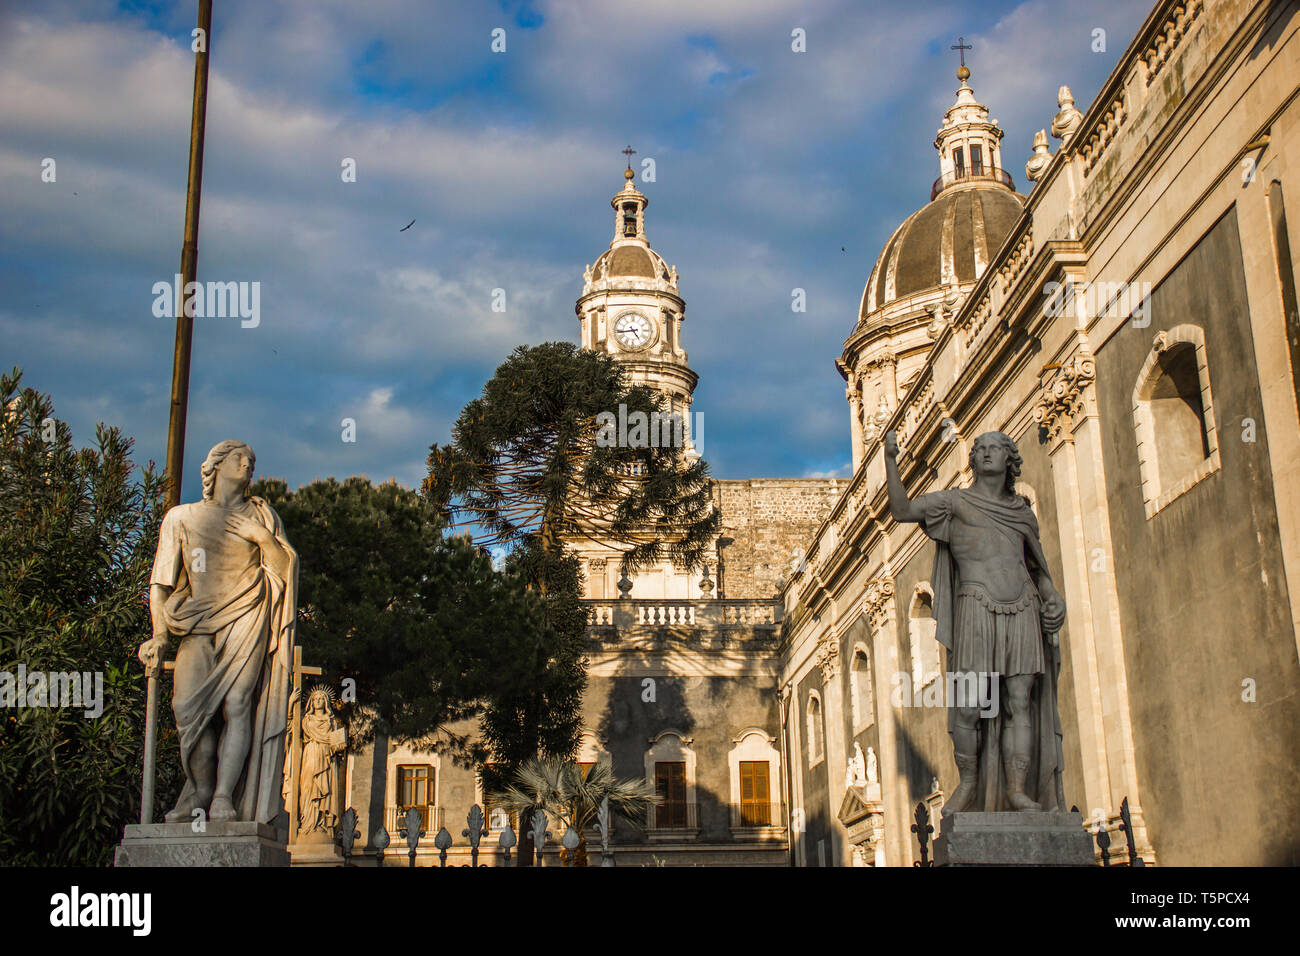 Catania cathedral detail, baroque architecture with statues and dome Stock Photo